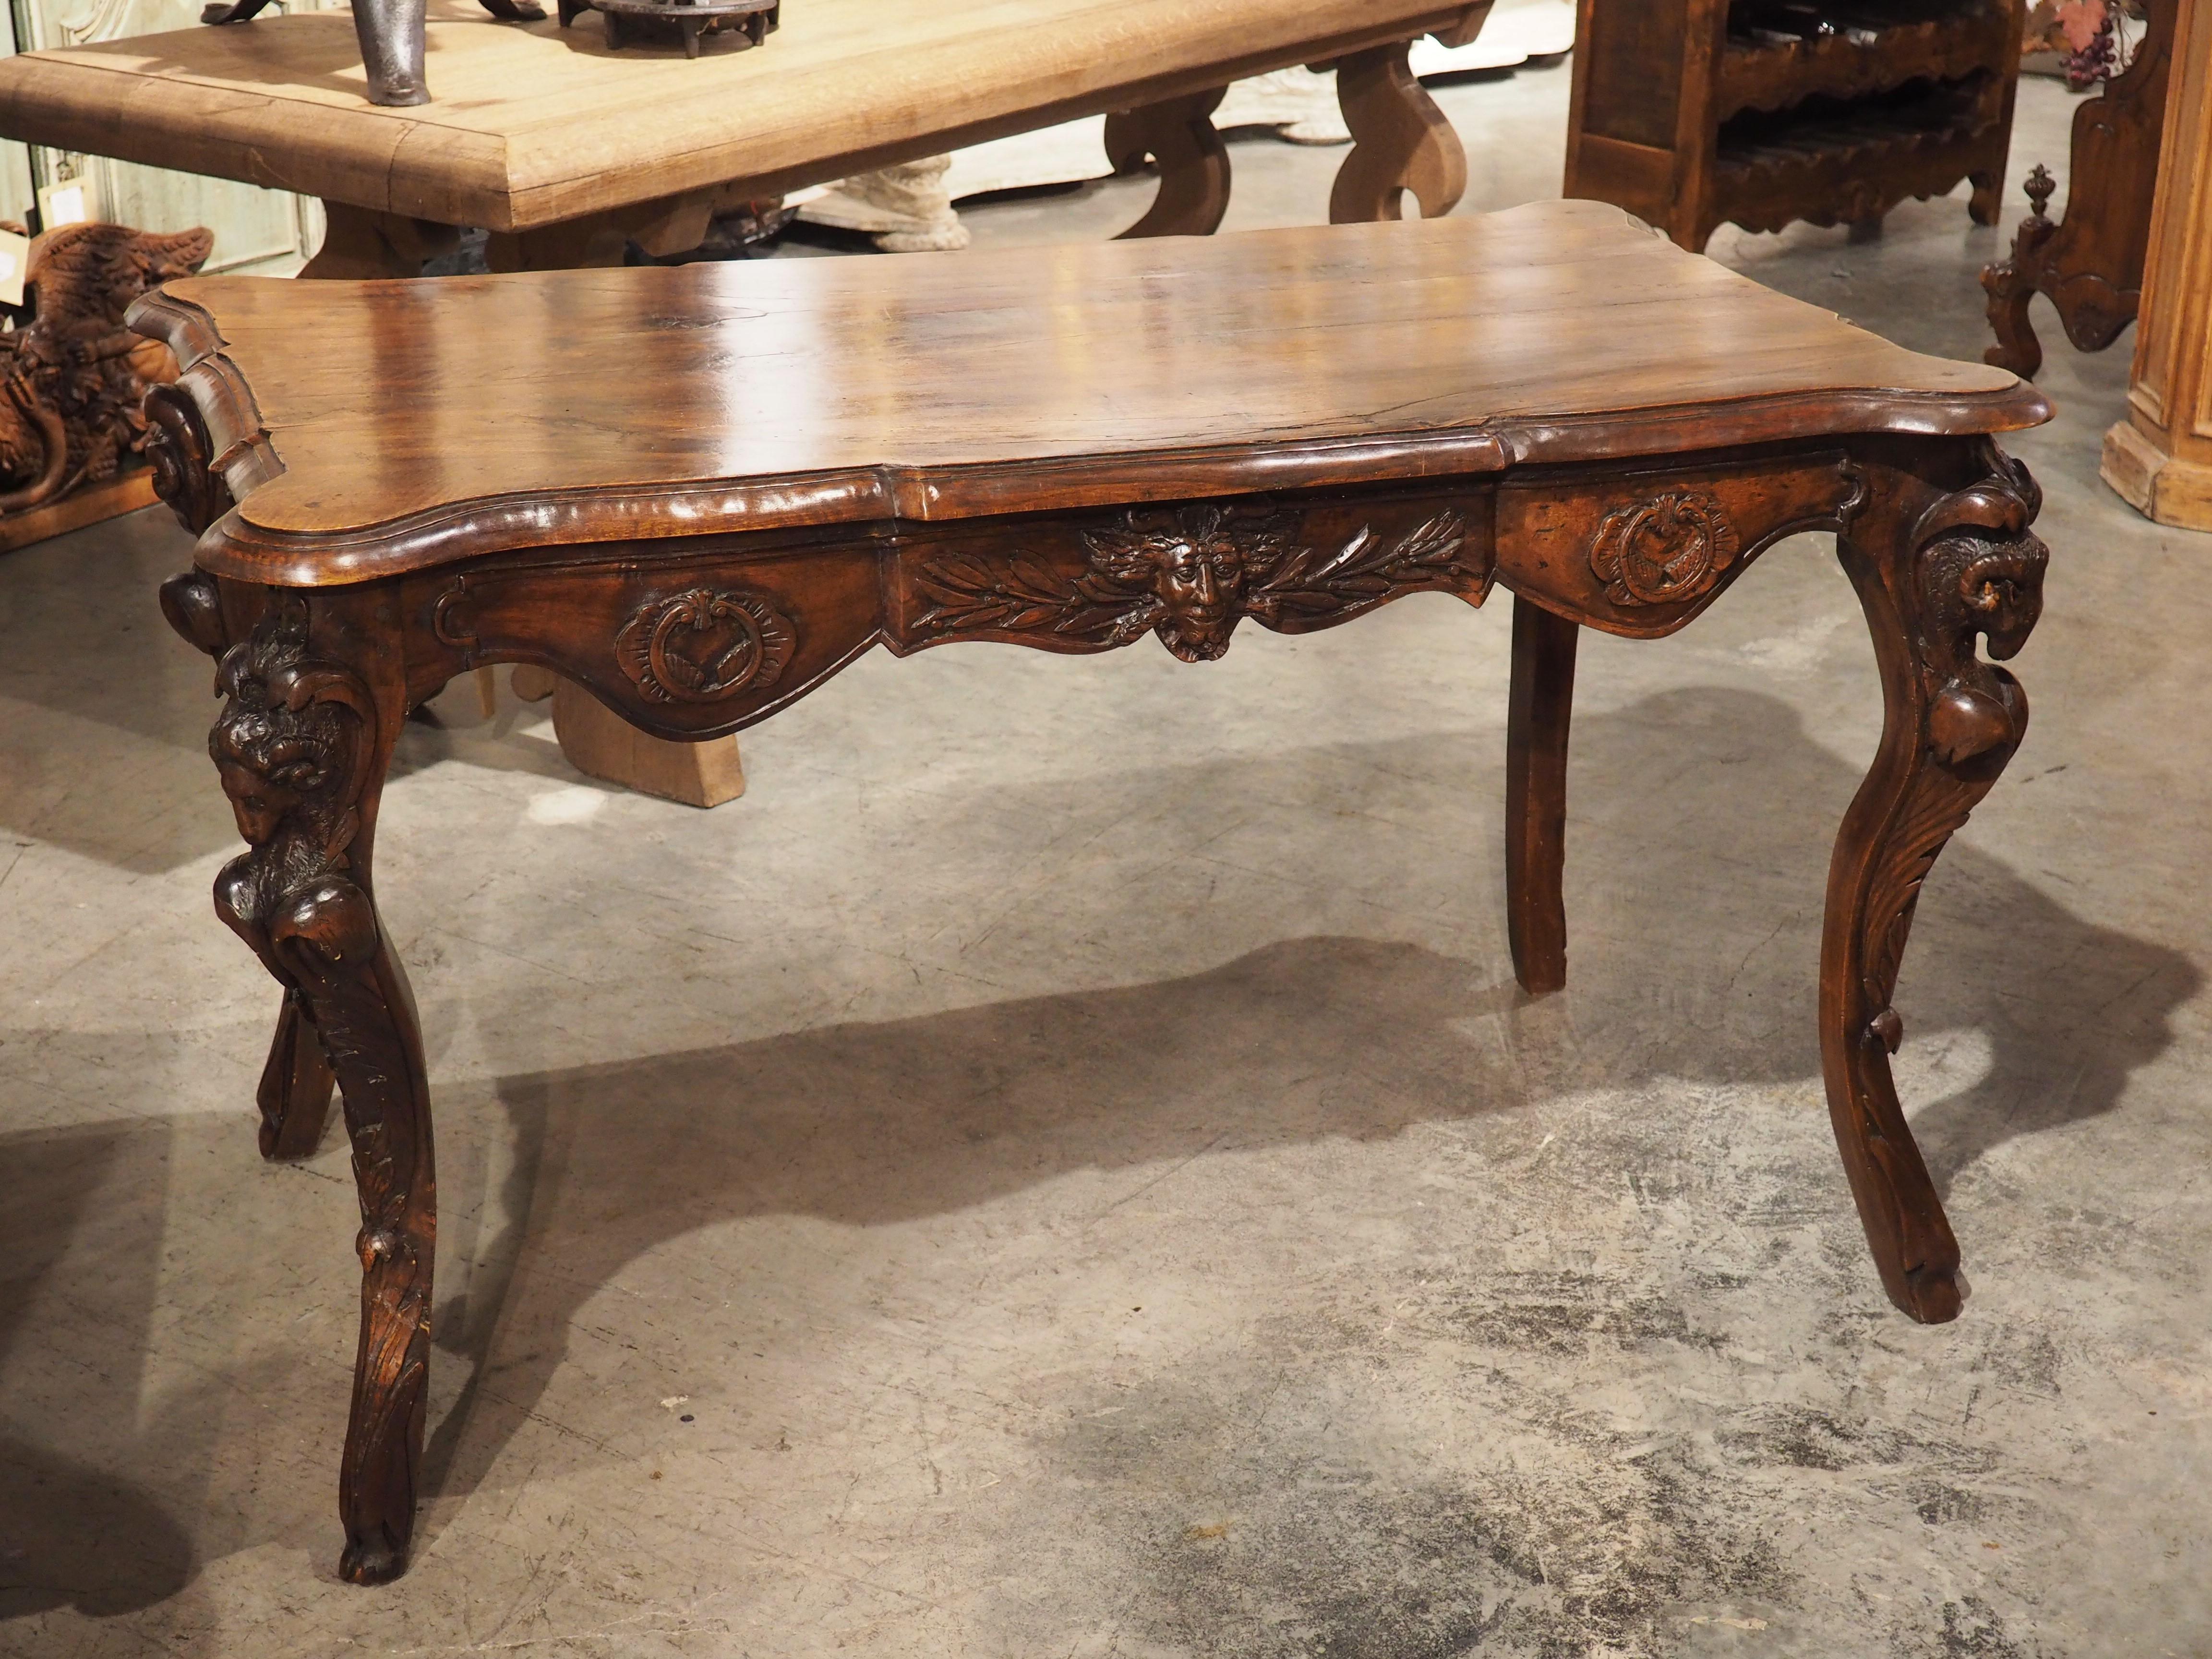 Circa 1870 French Walnut Wood Center Table with Rams' Heads and Fleur De Lys For Sale 6